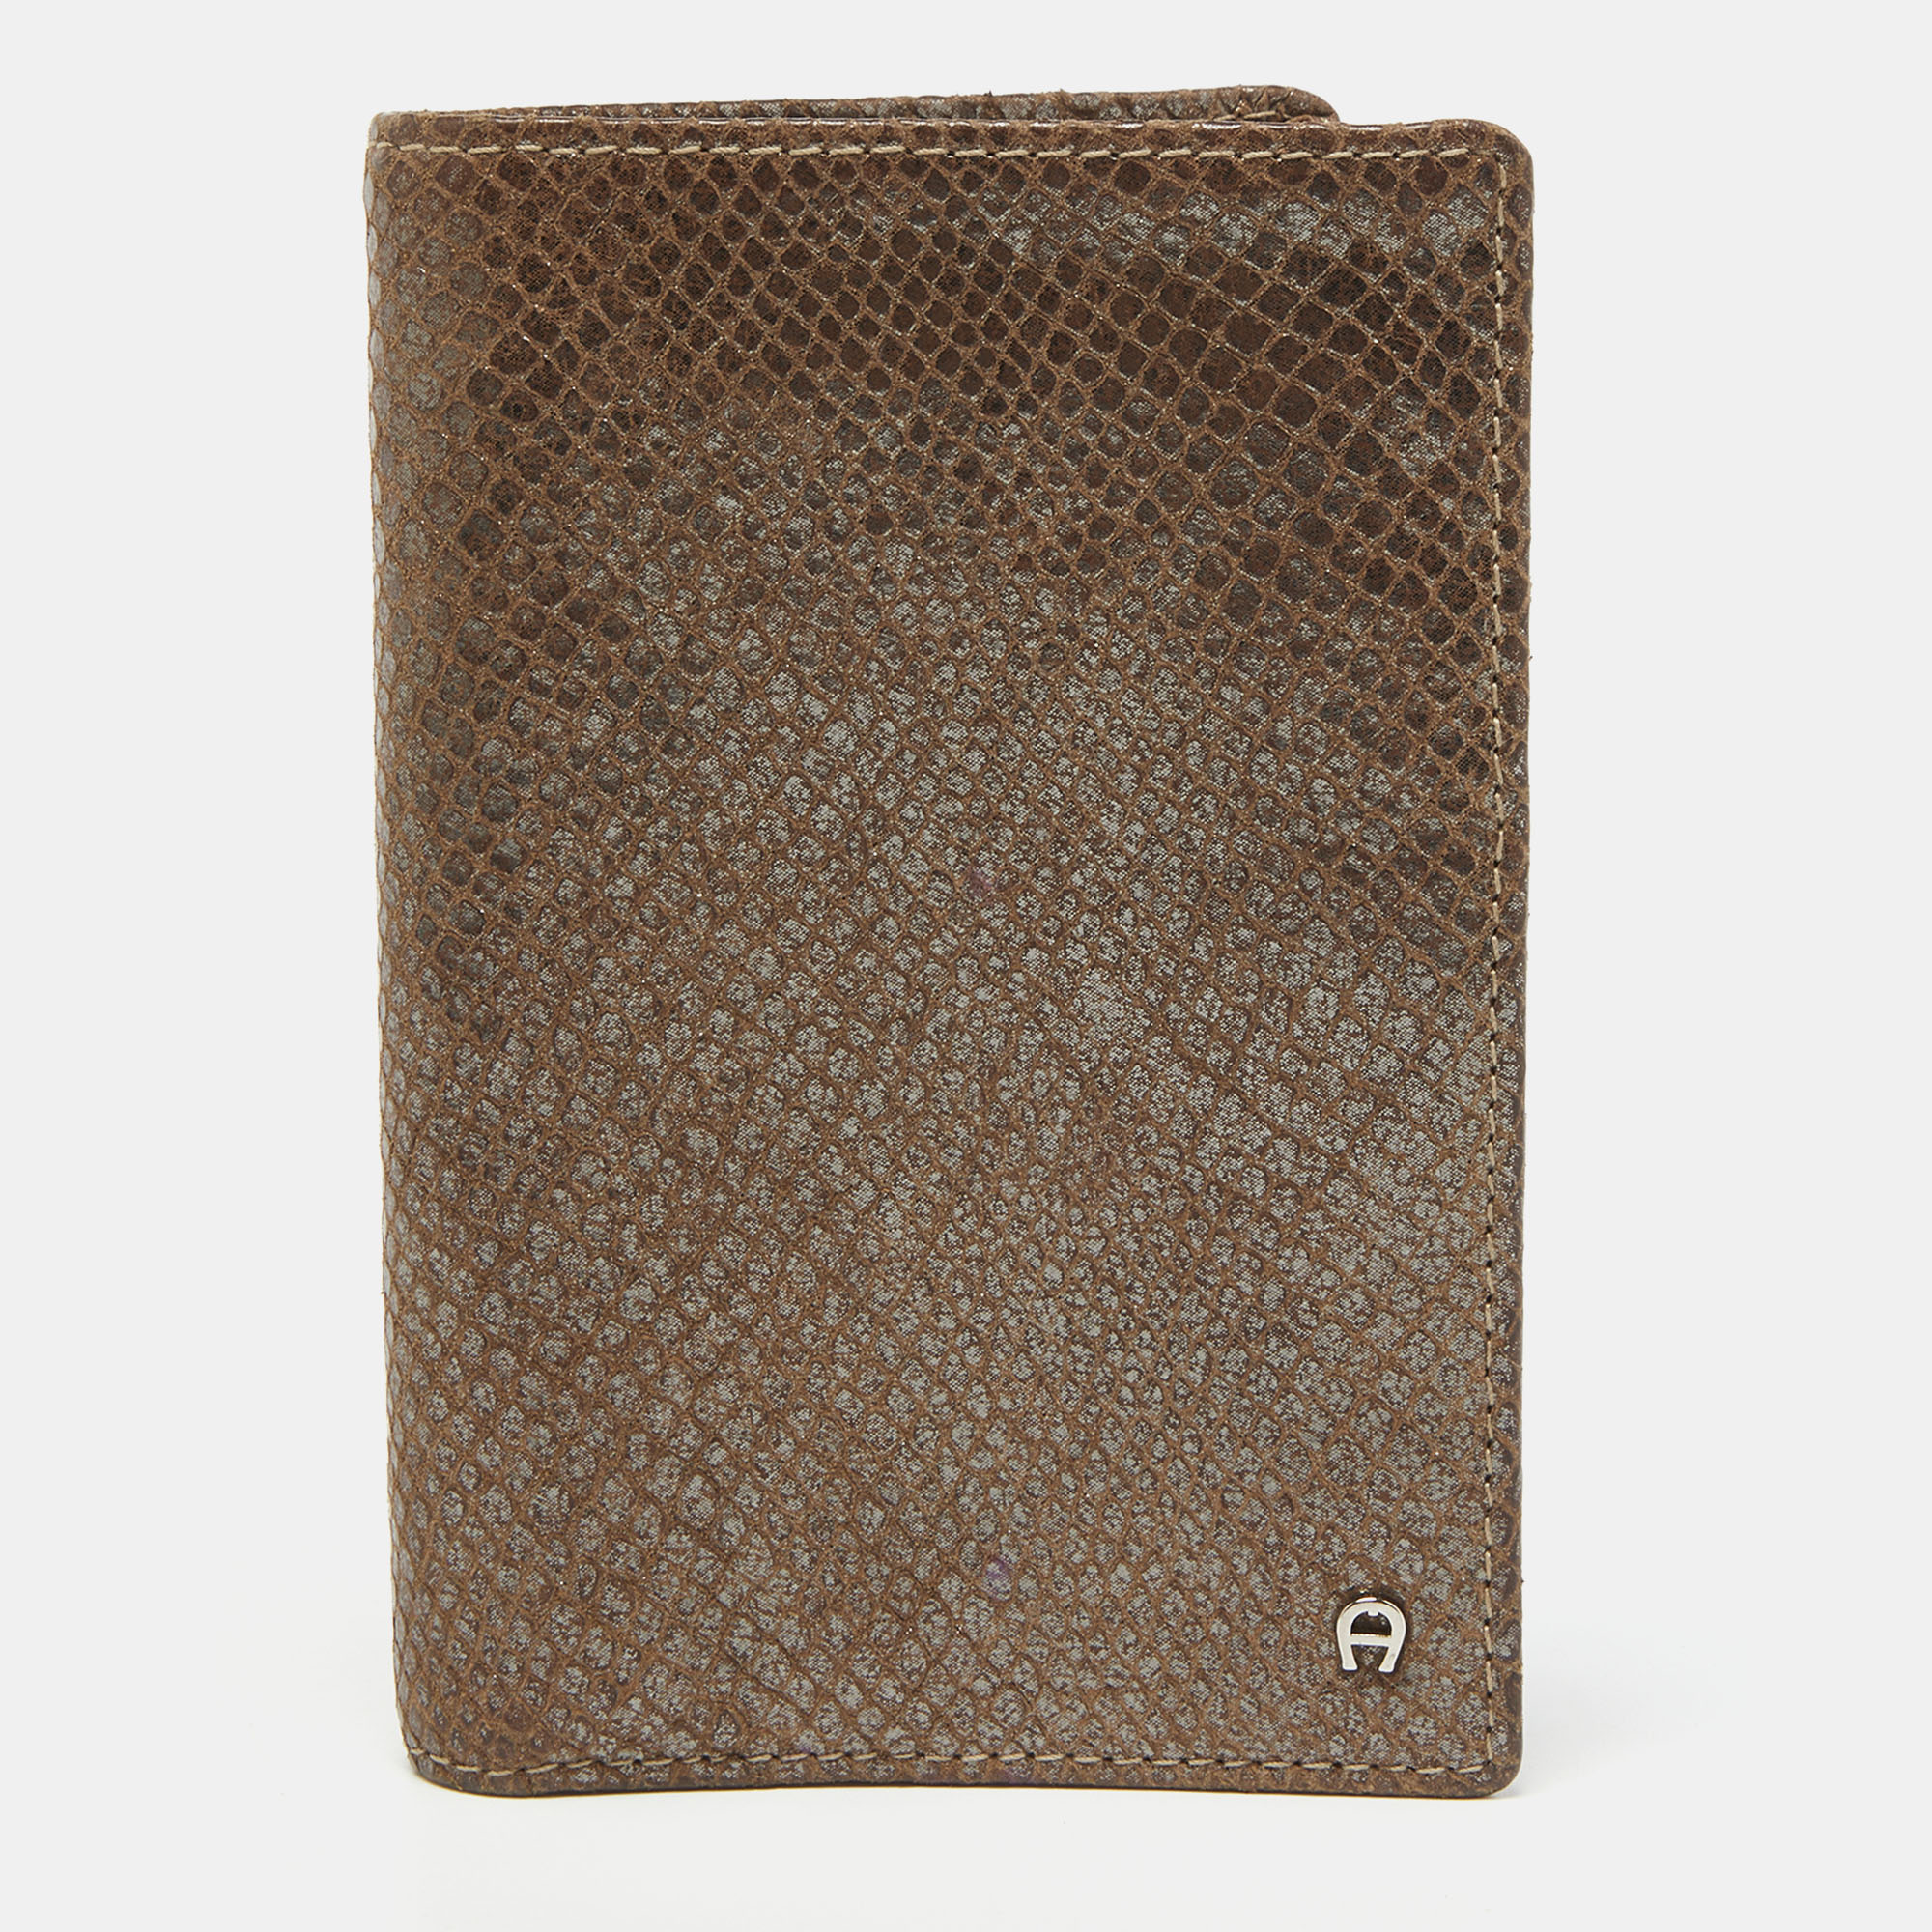 Pre-owned Aigner Brown Shimmer Snakeskin Embossed Leather Bifold Wallet